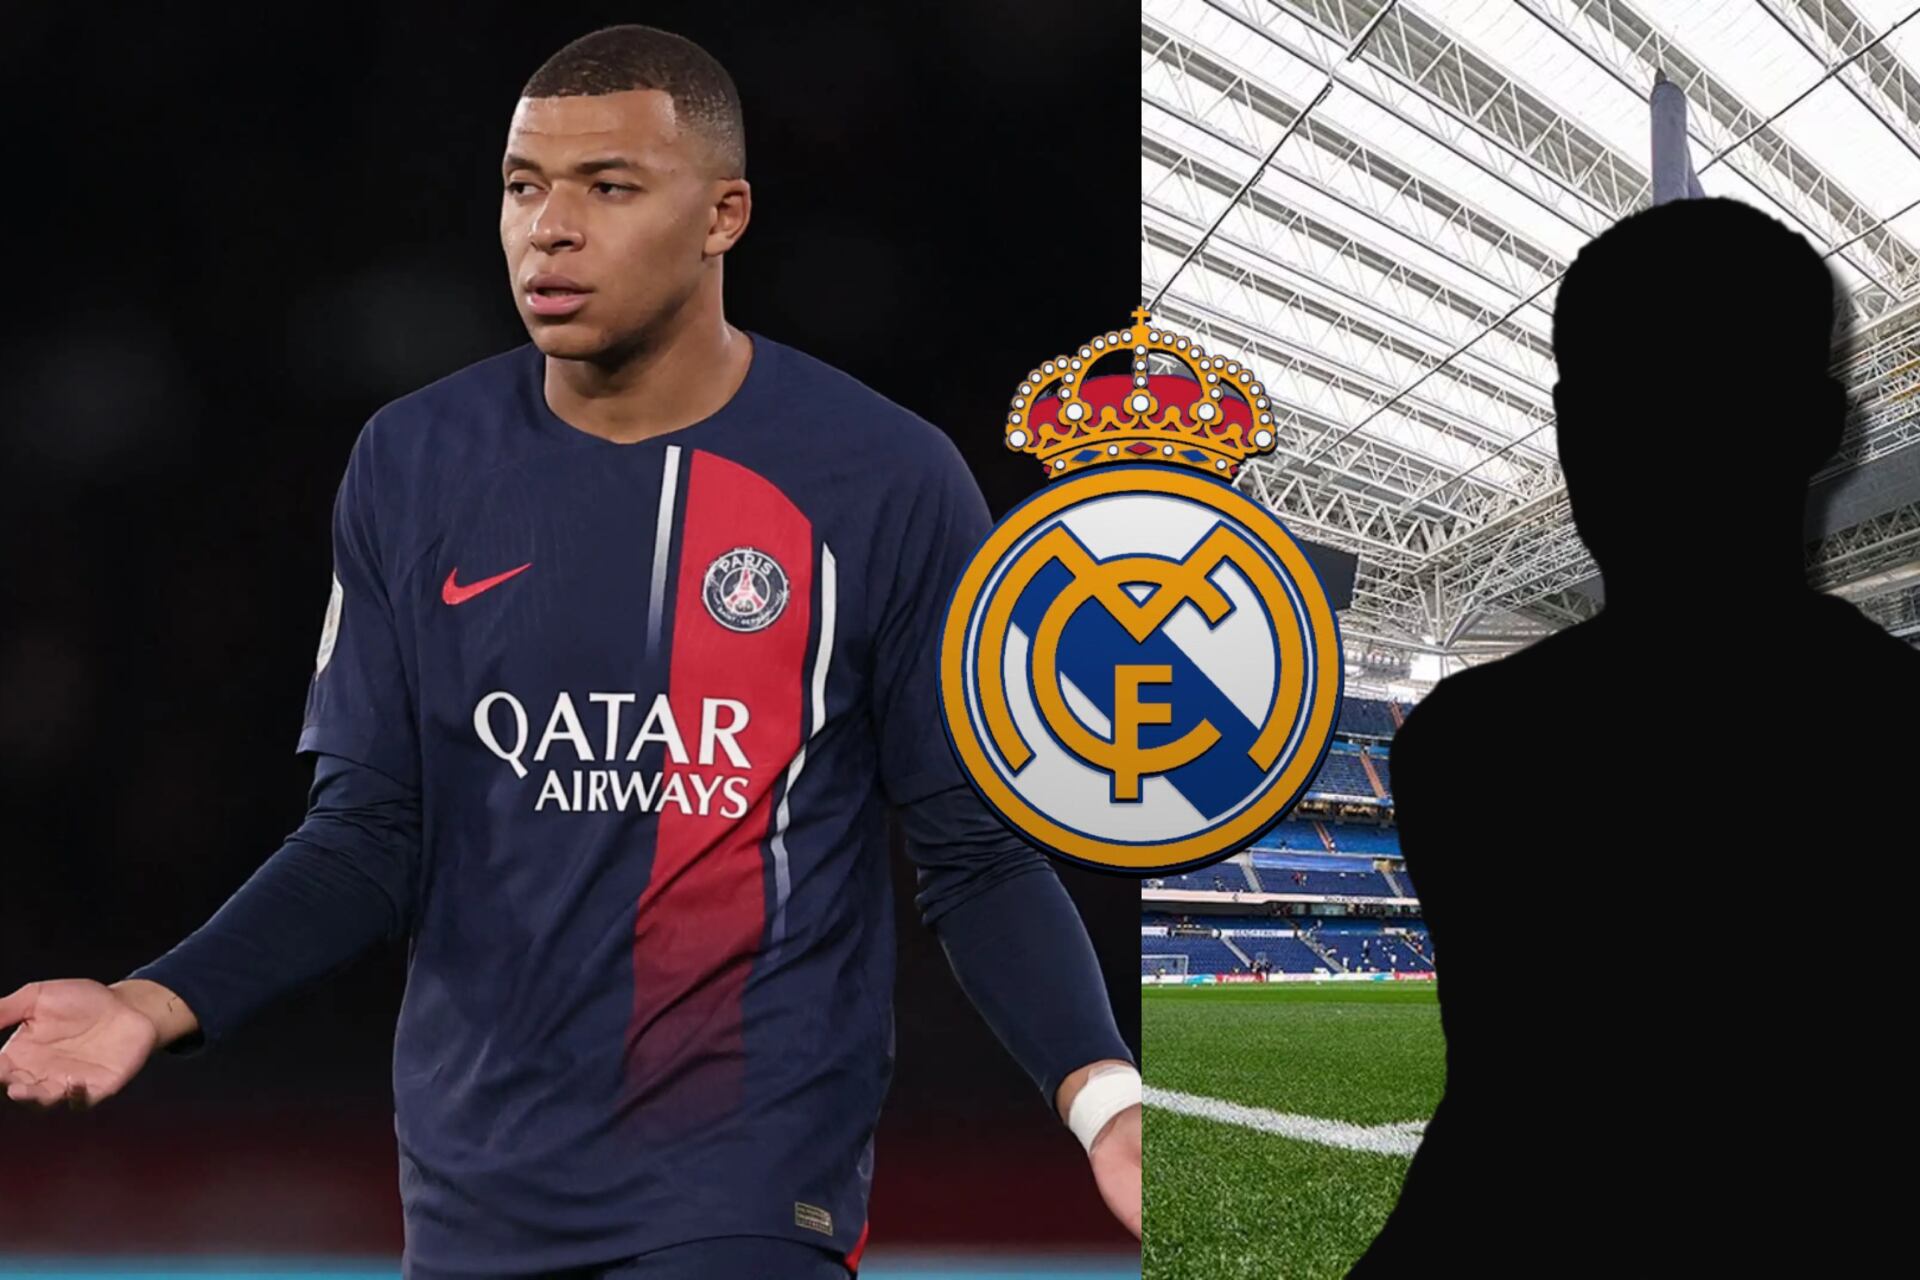 Not just Mbappé, the other PSG player that could join Real Madrid soon